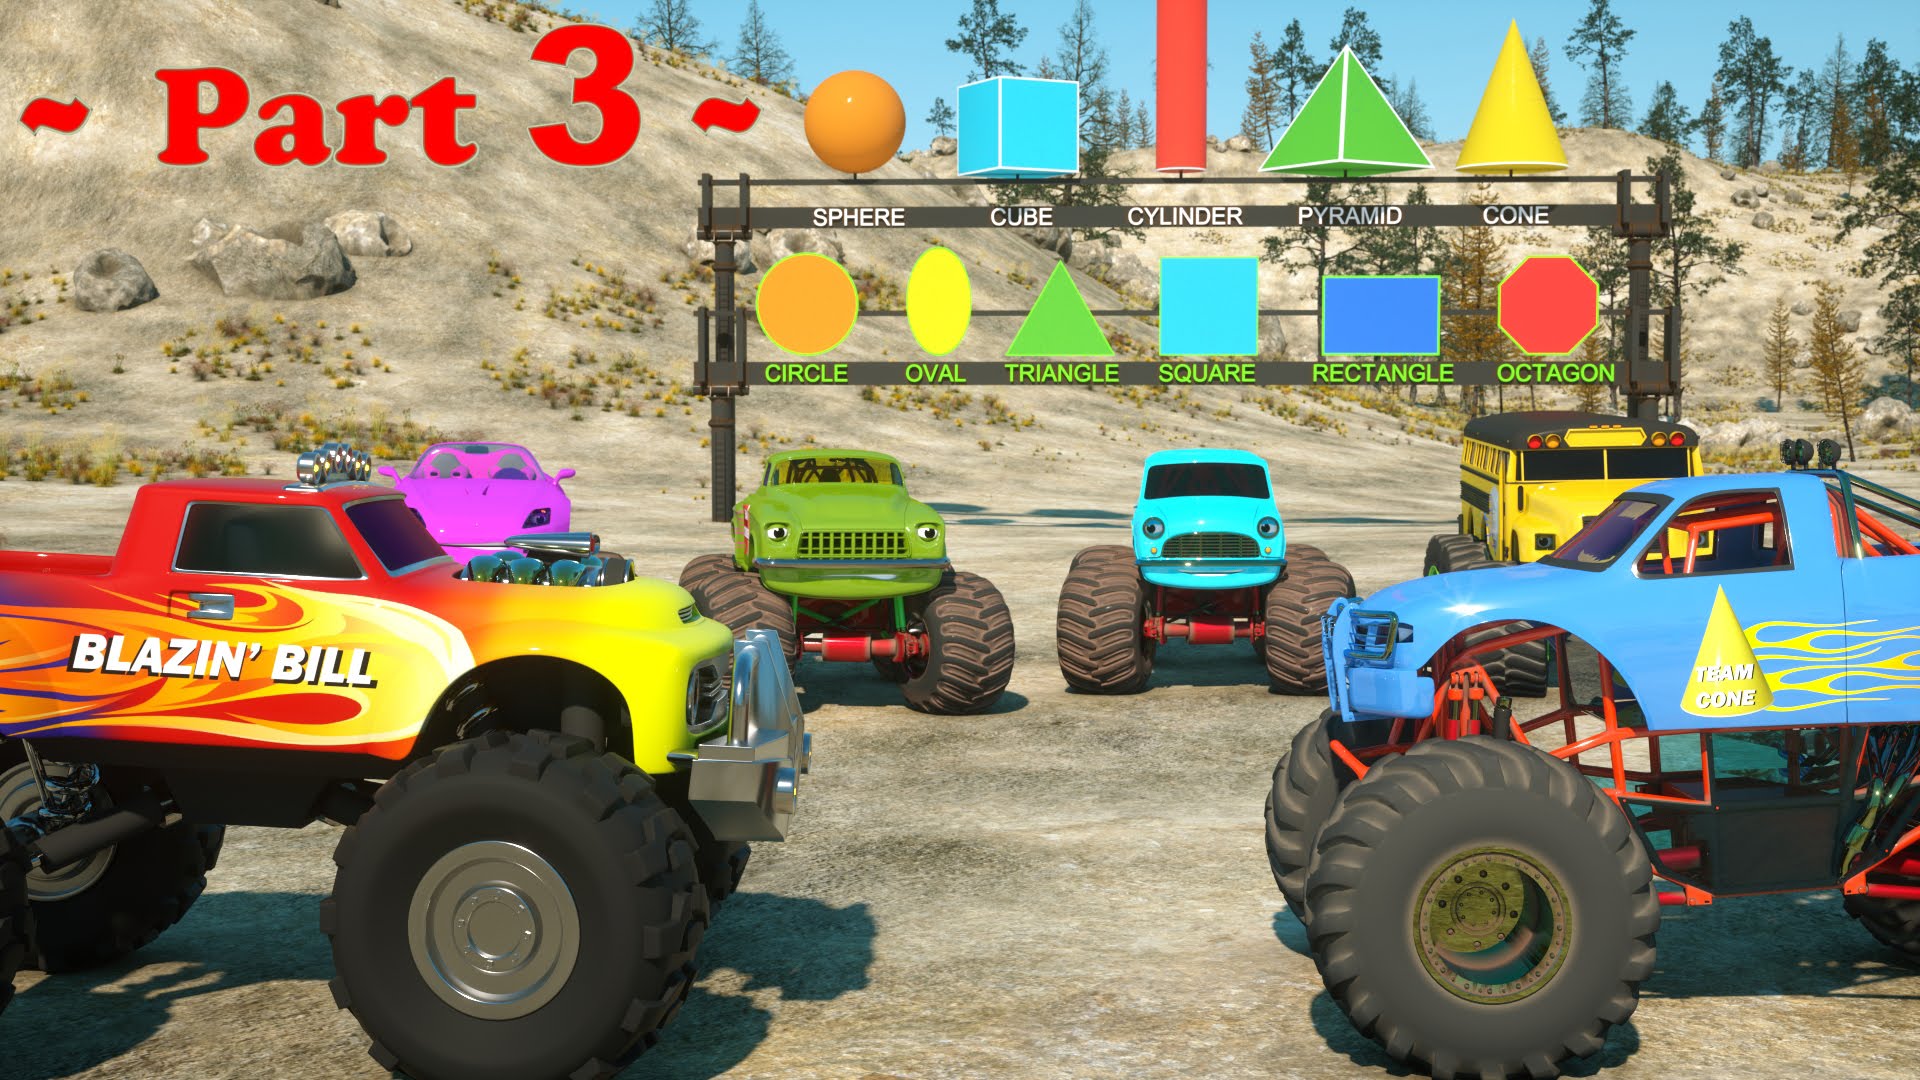 Learn Shapes And Race Monster Trucks - TOYS (Part 3) | Videos For ...